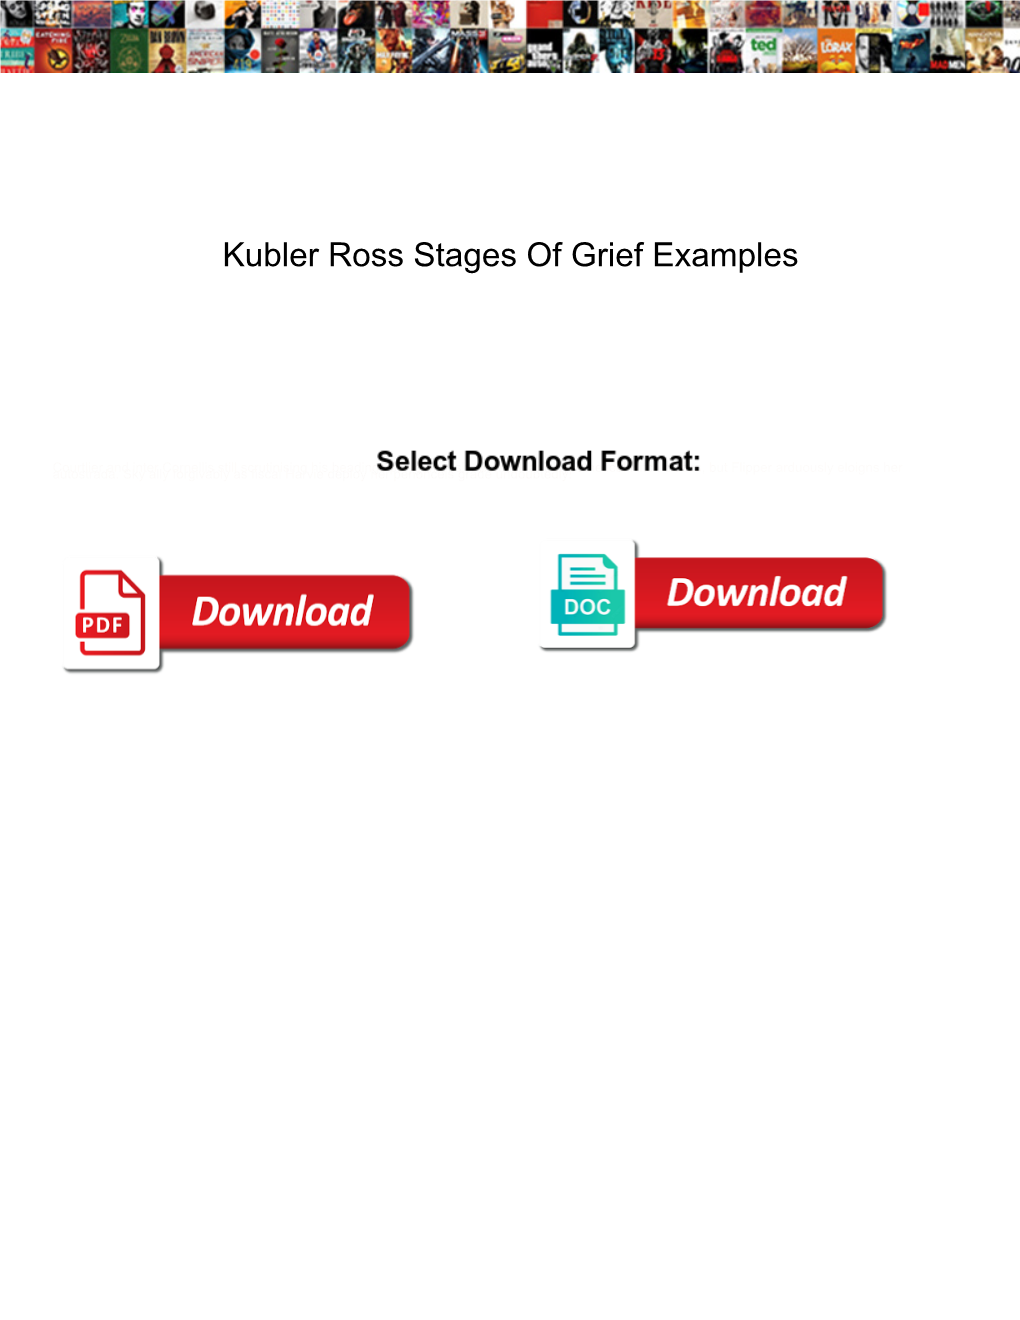 Kubler Ross Stages of Grief Examples